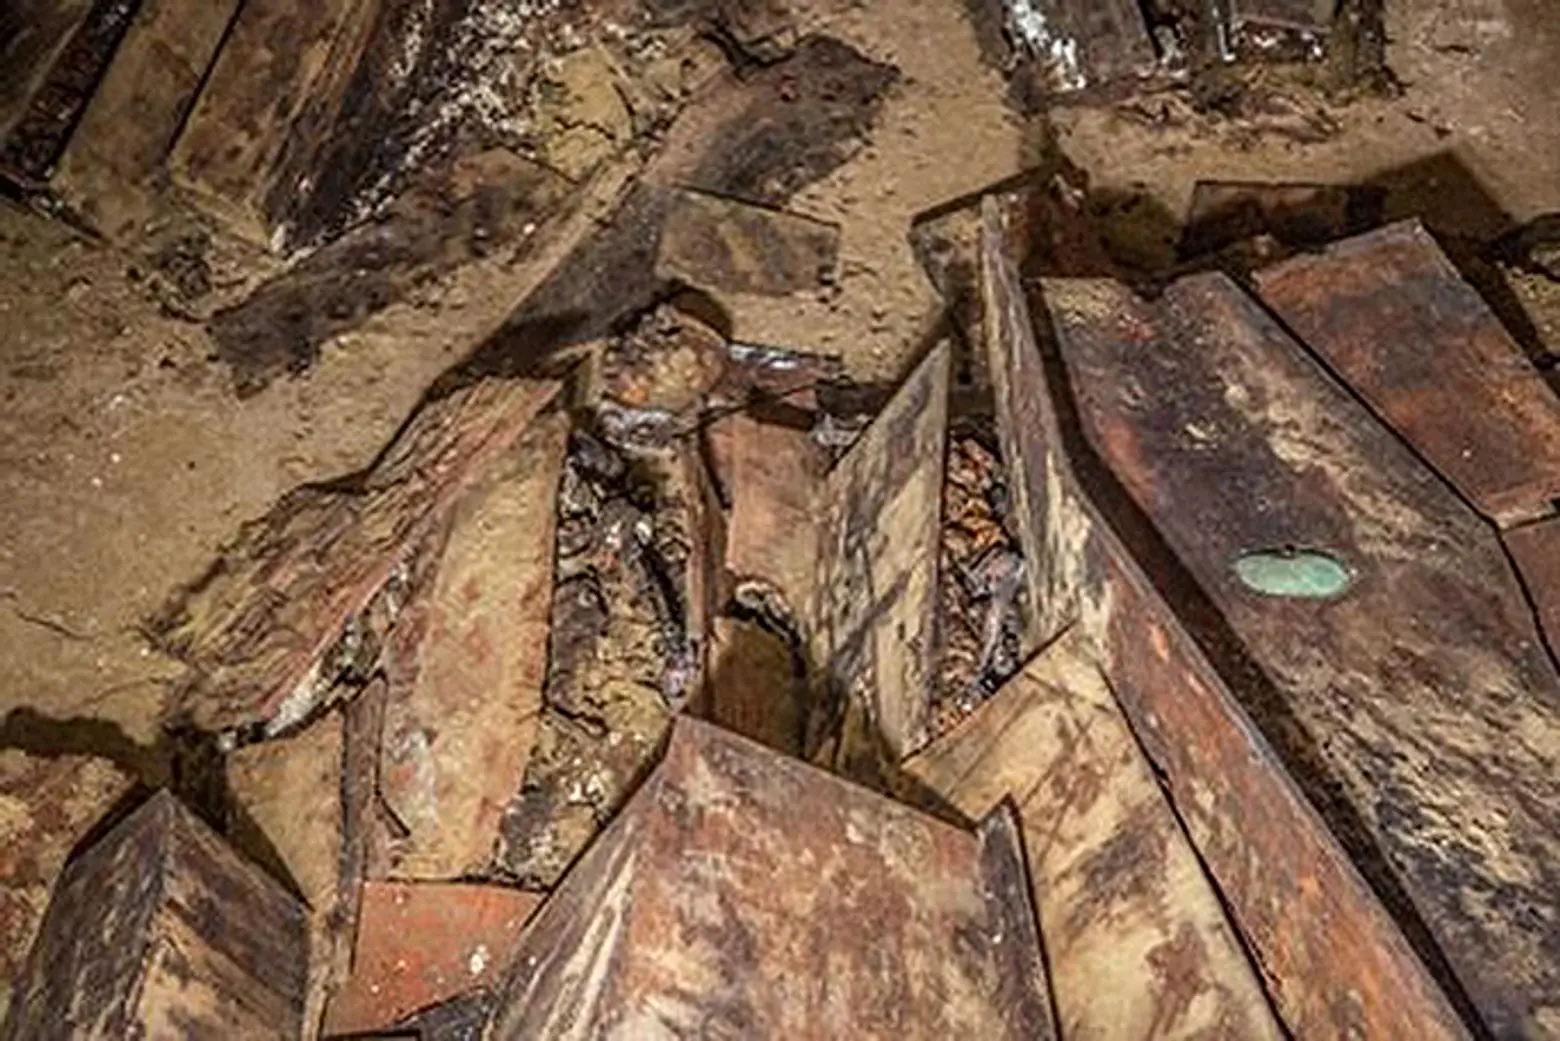 Yet Another Burial Vault Uncovered Near Washington Square Park, Comes Filled With Coffins